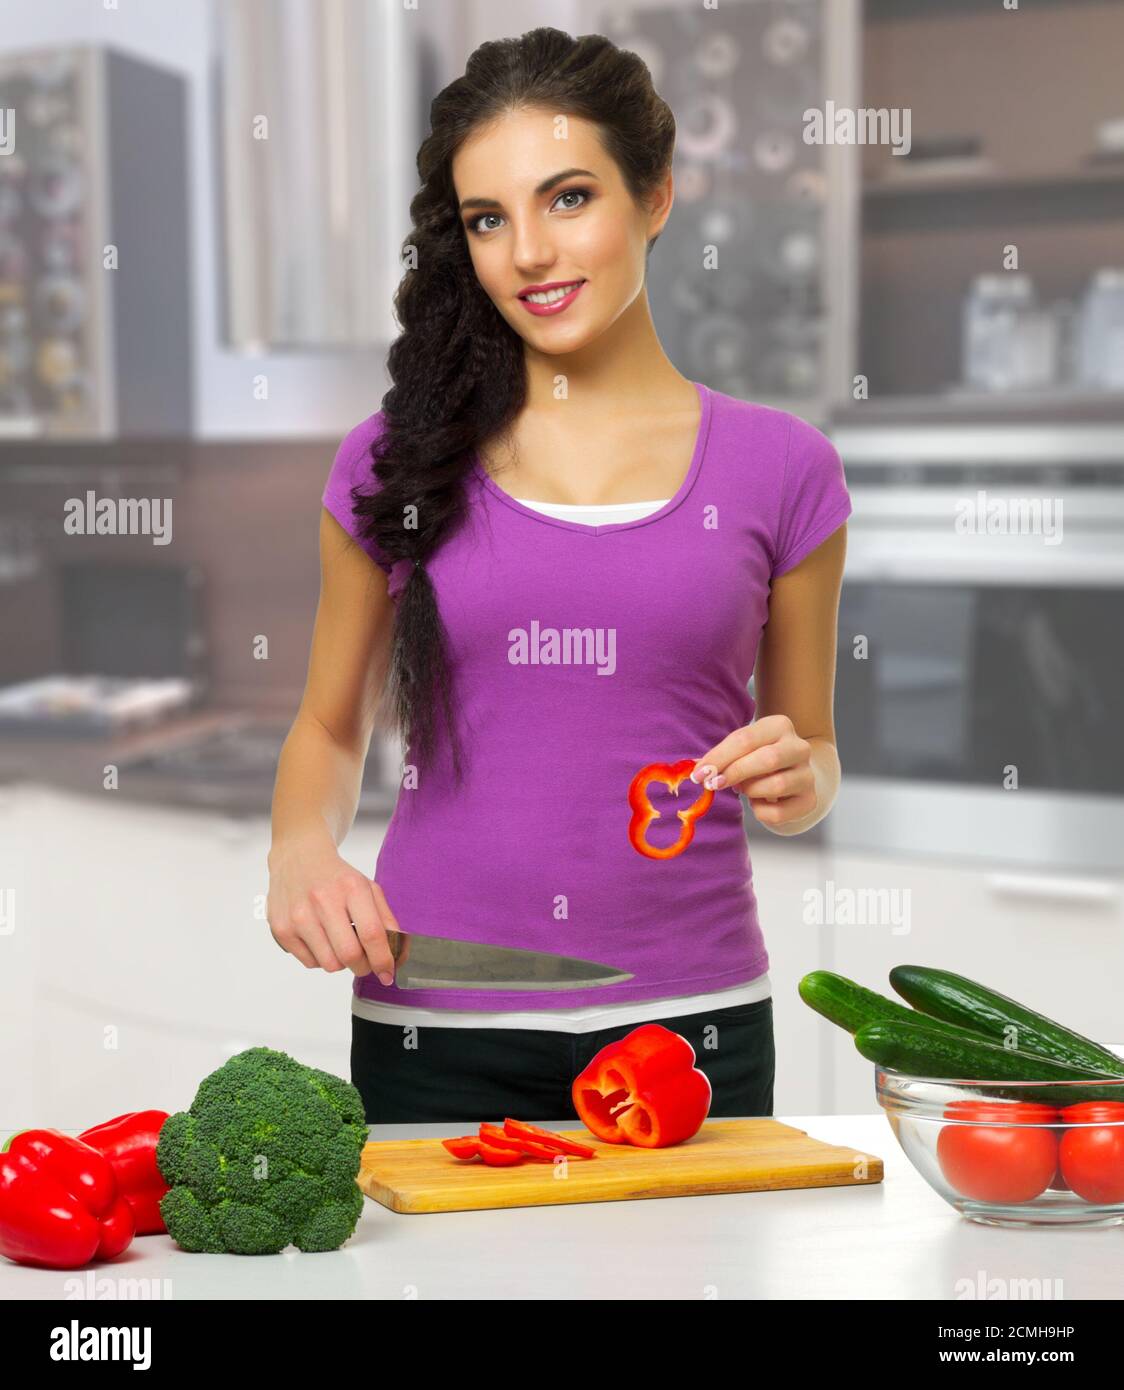 Young cooking woman in the kitchen Stock Photo